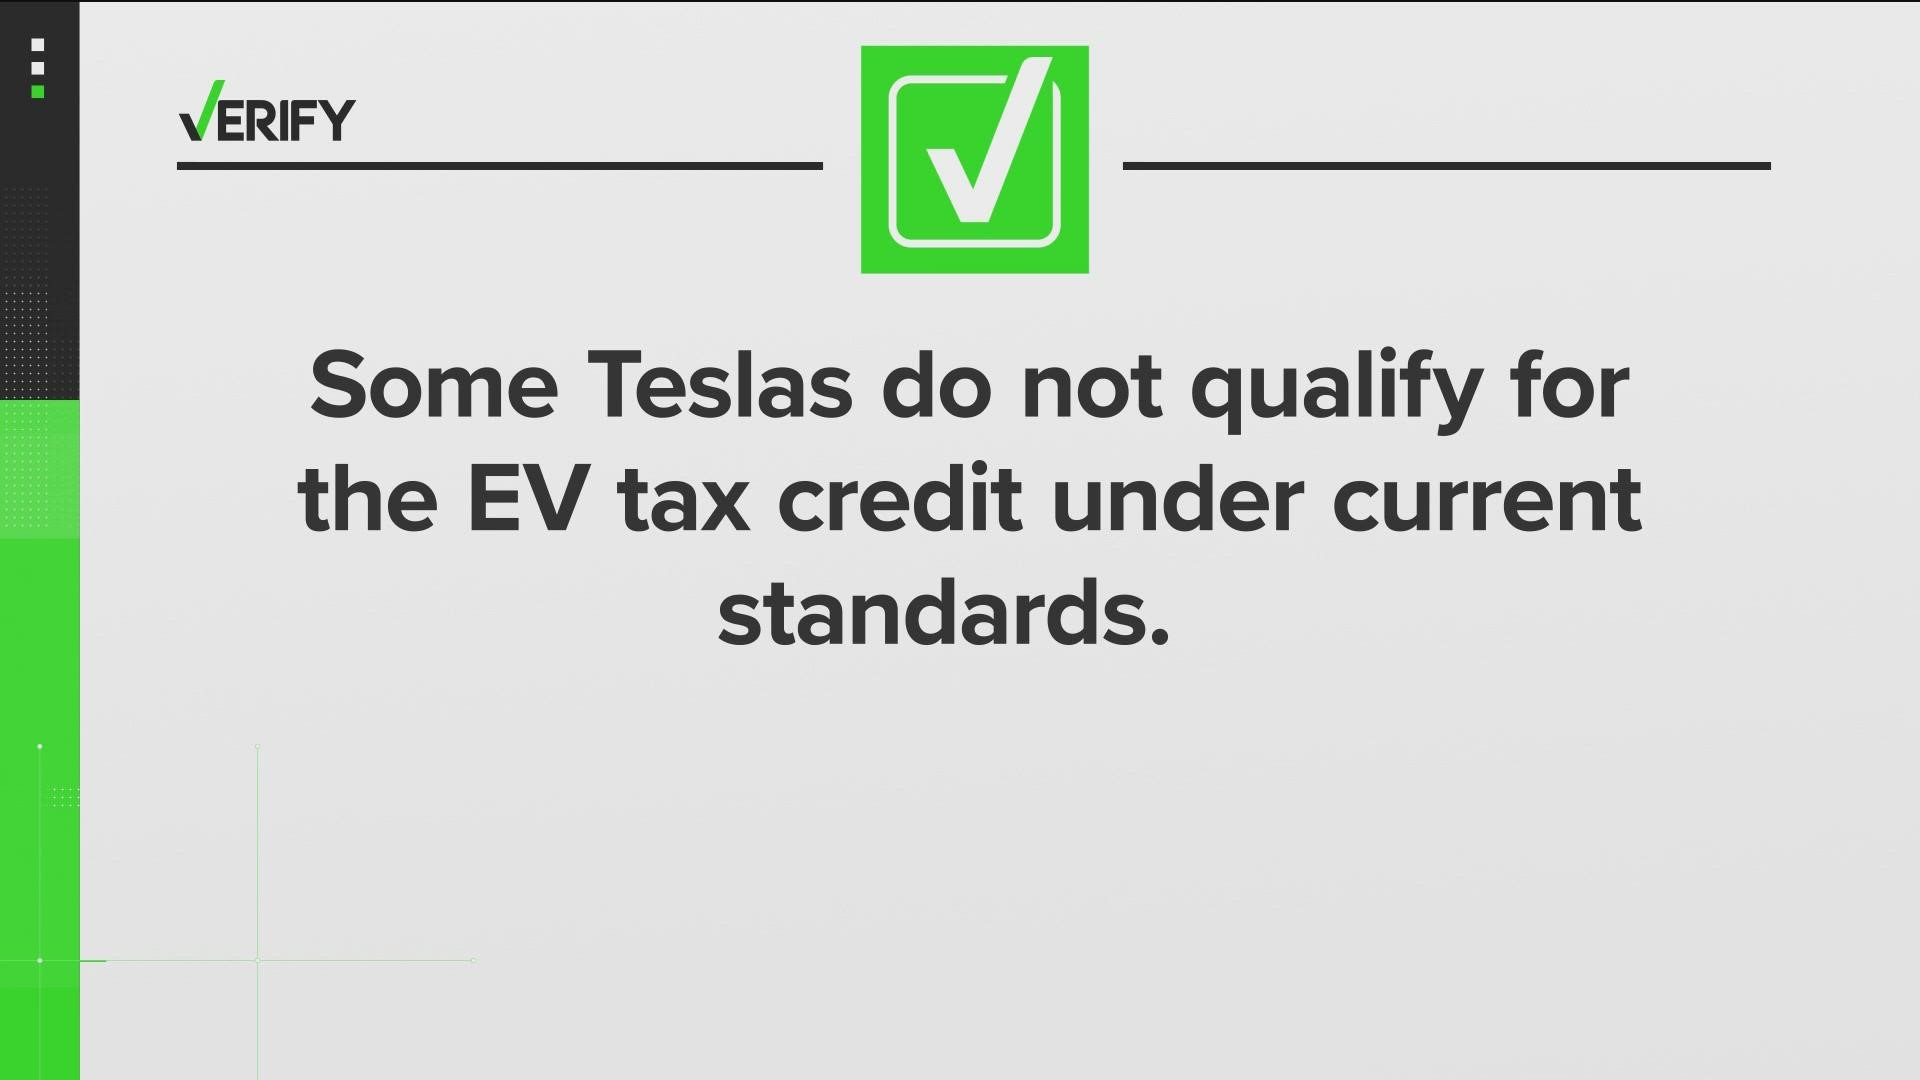 Electric vehicle owners may get up to $7,500 in tax credits, but not all may qualify.